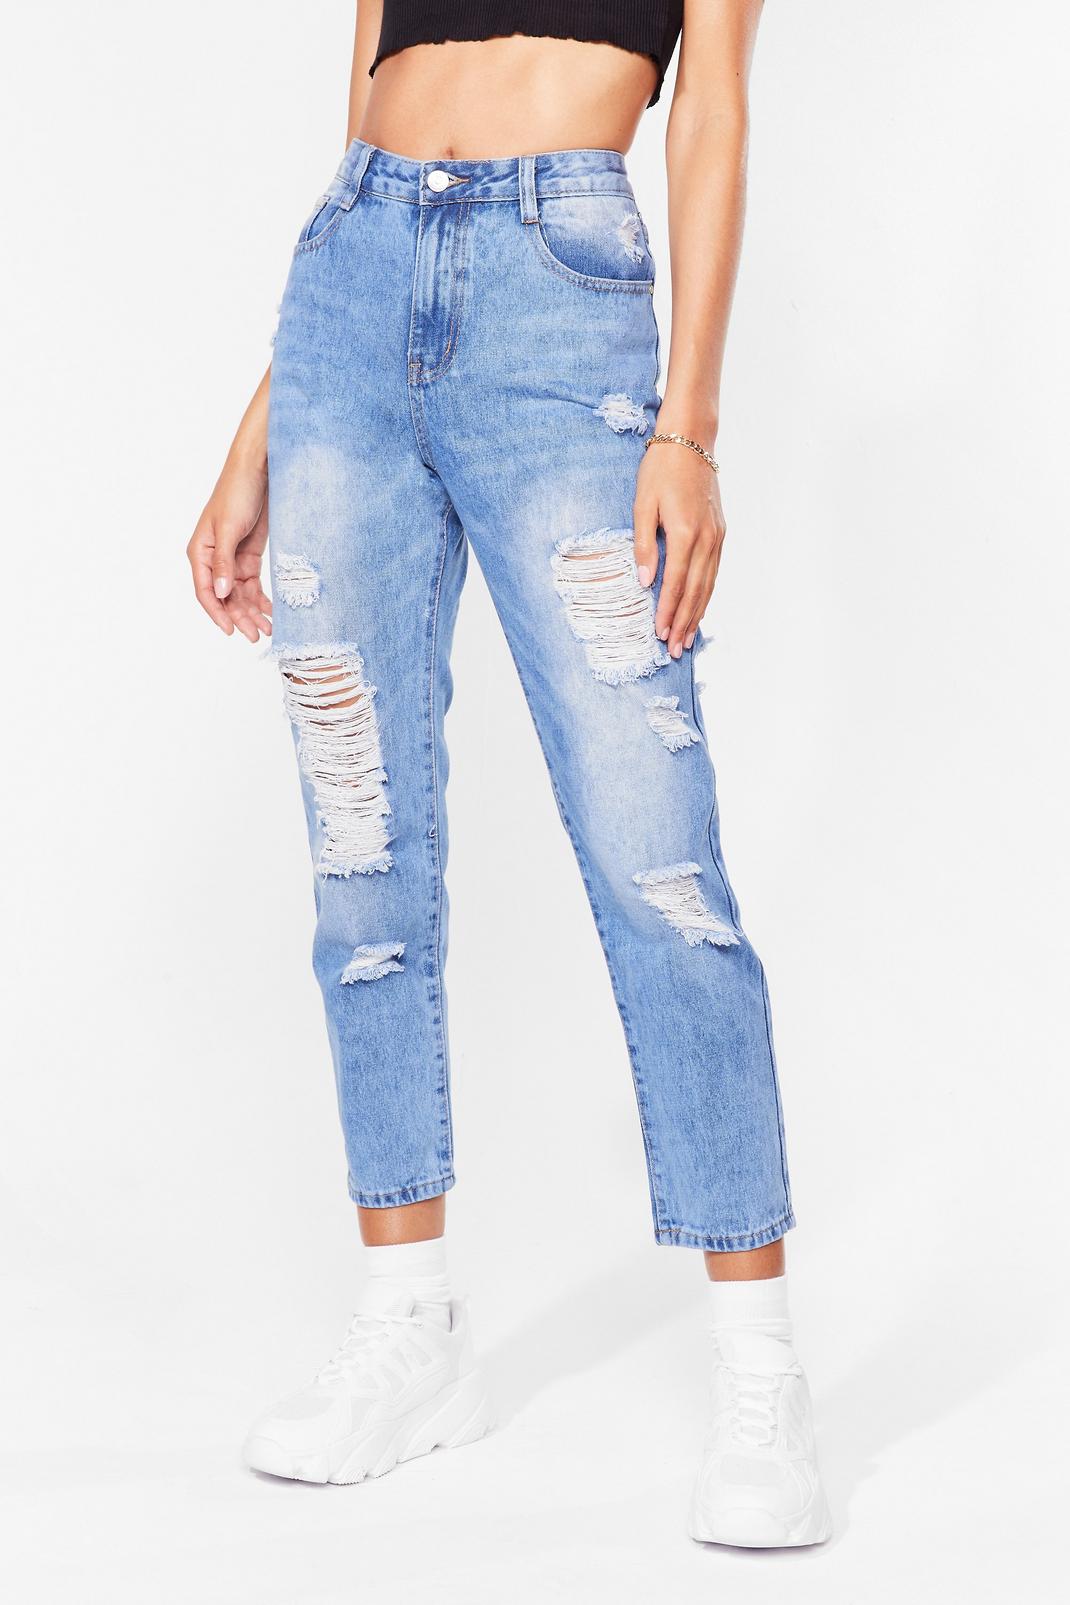 Give It Raw Best Shot Distressed Jeans image number 1